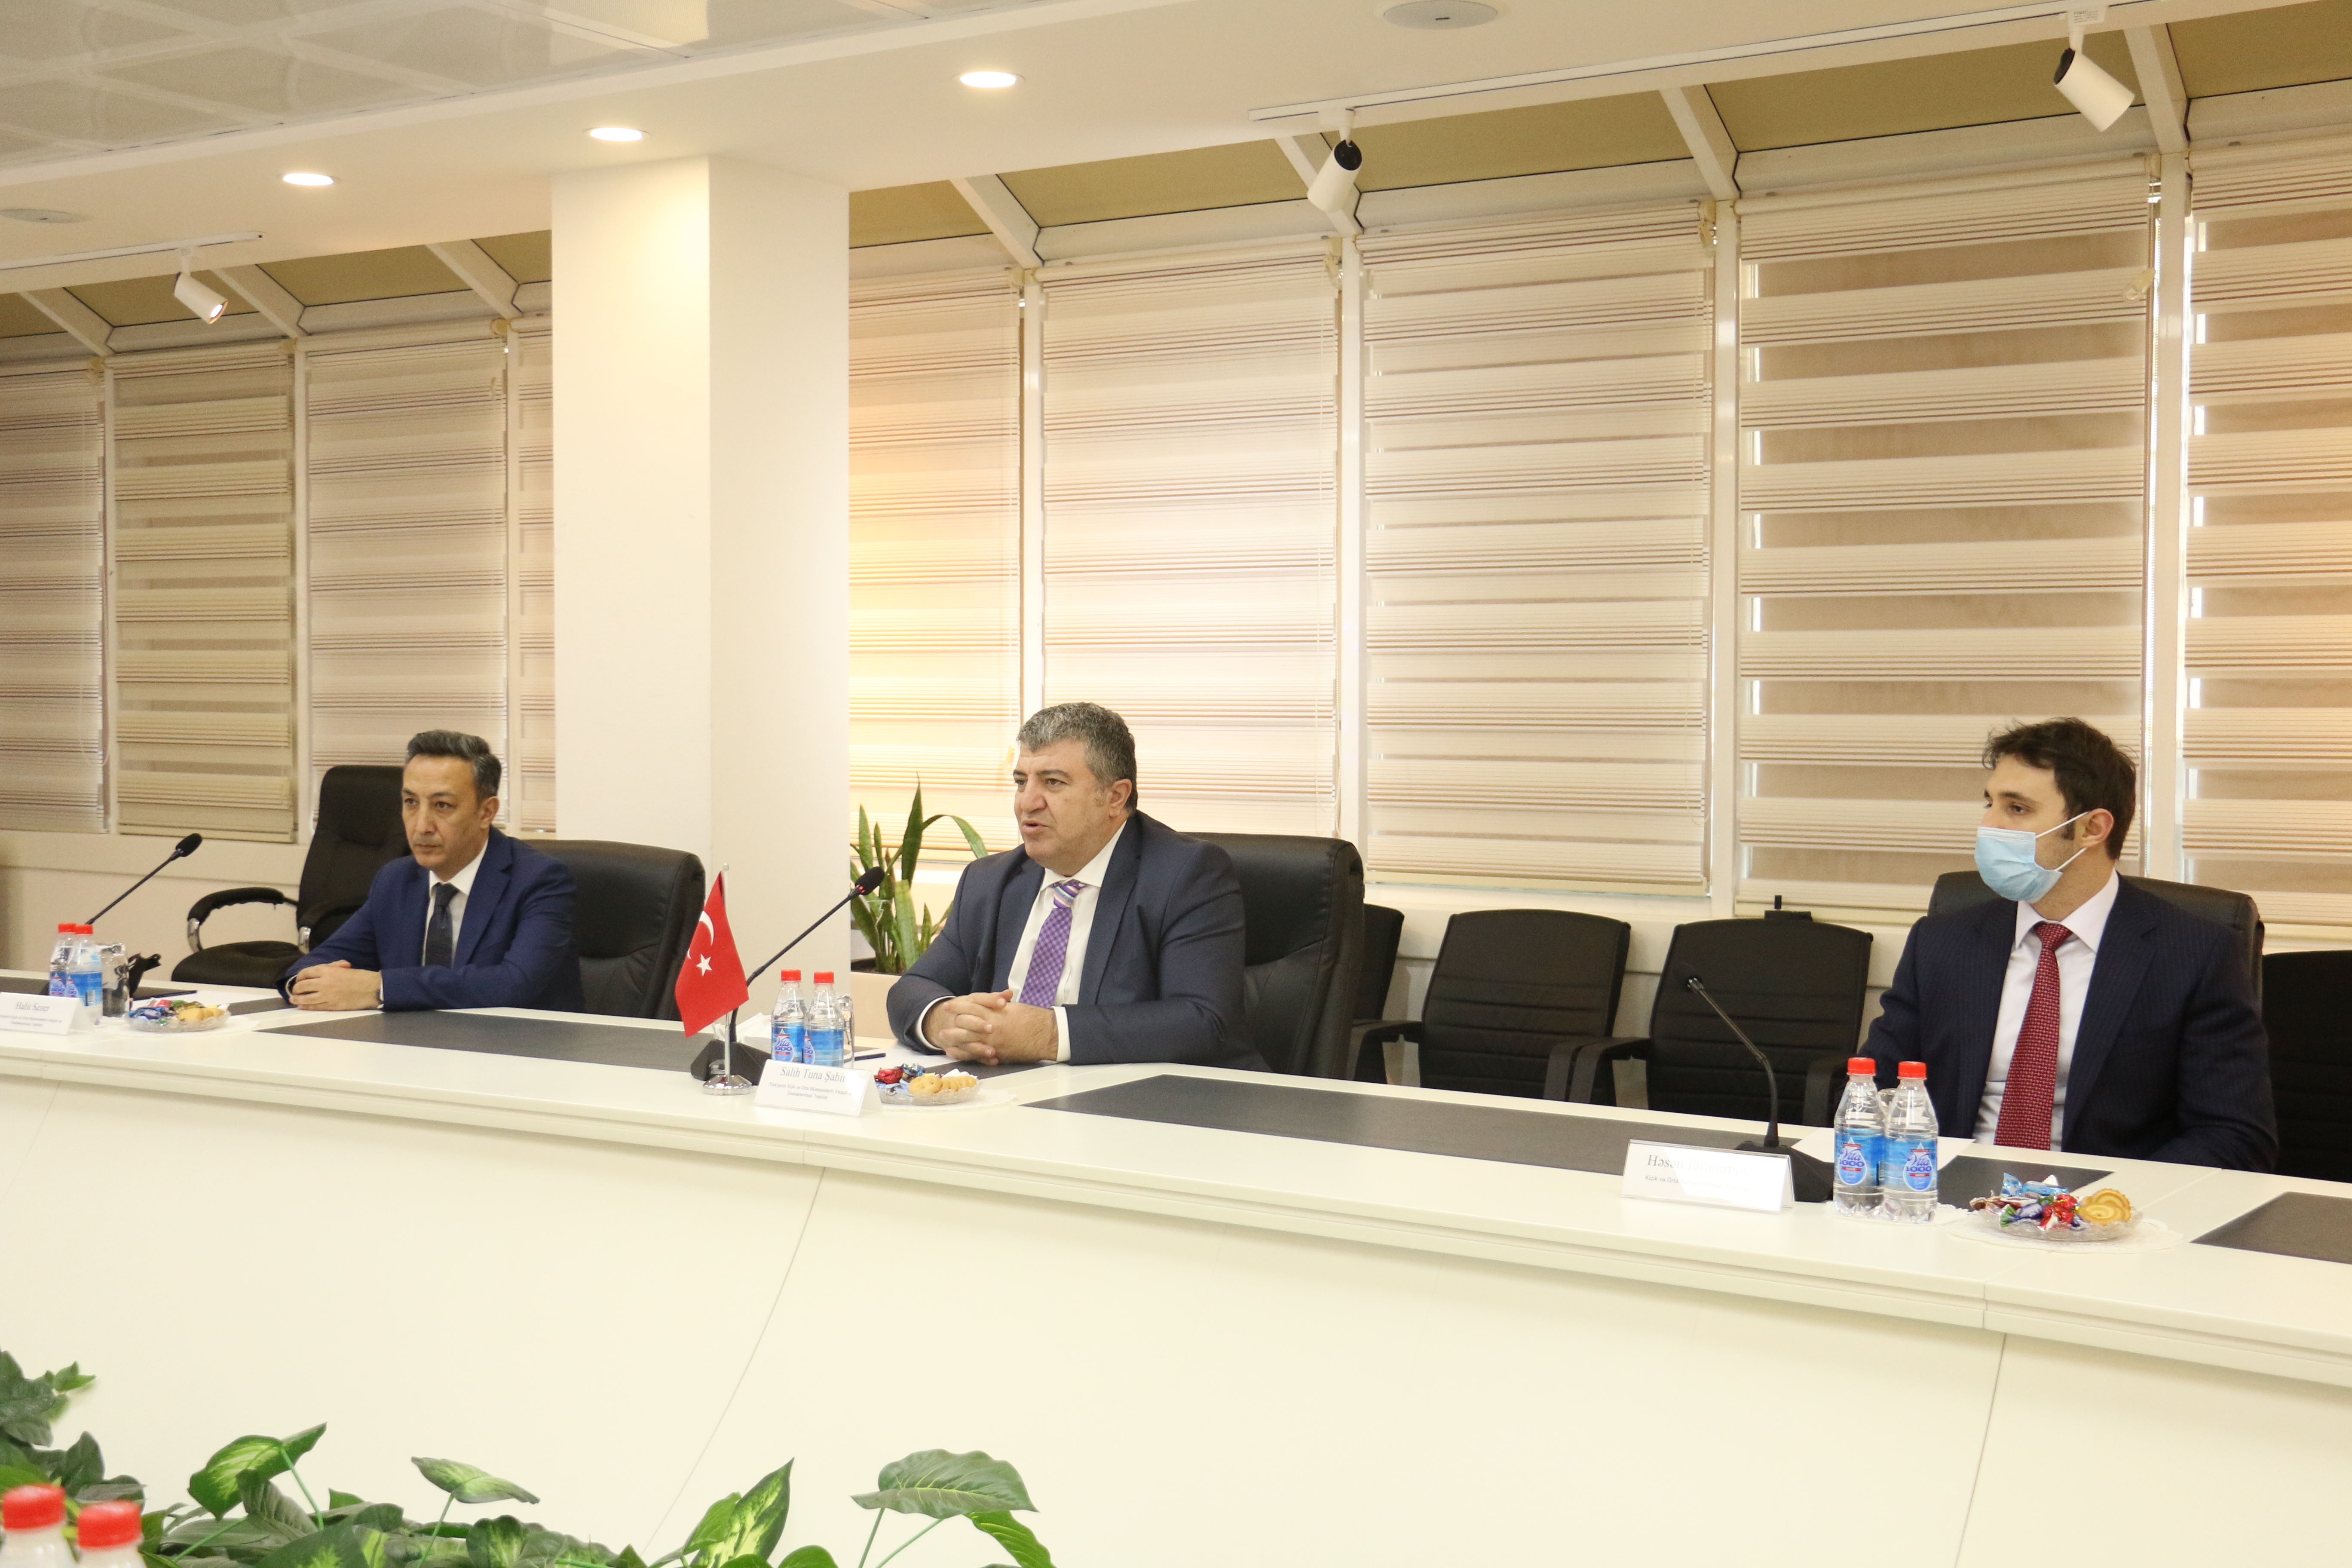 Turkey and Azerbaijan will cooperate in the development of SMEs